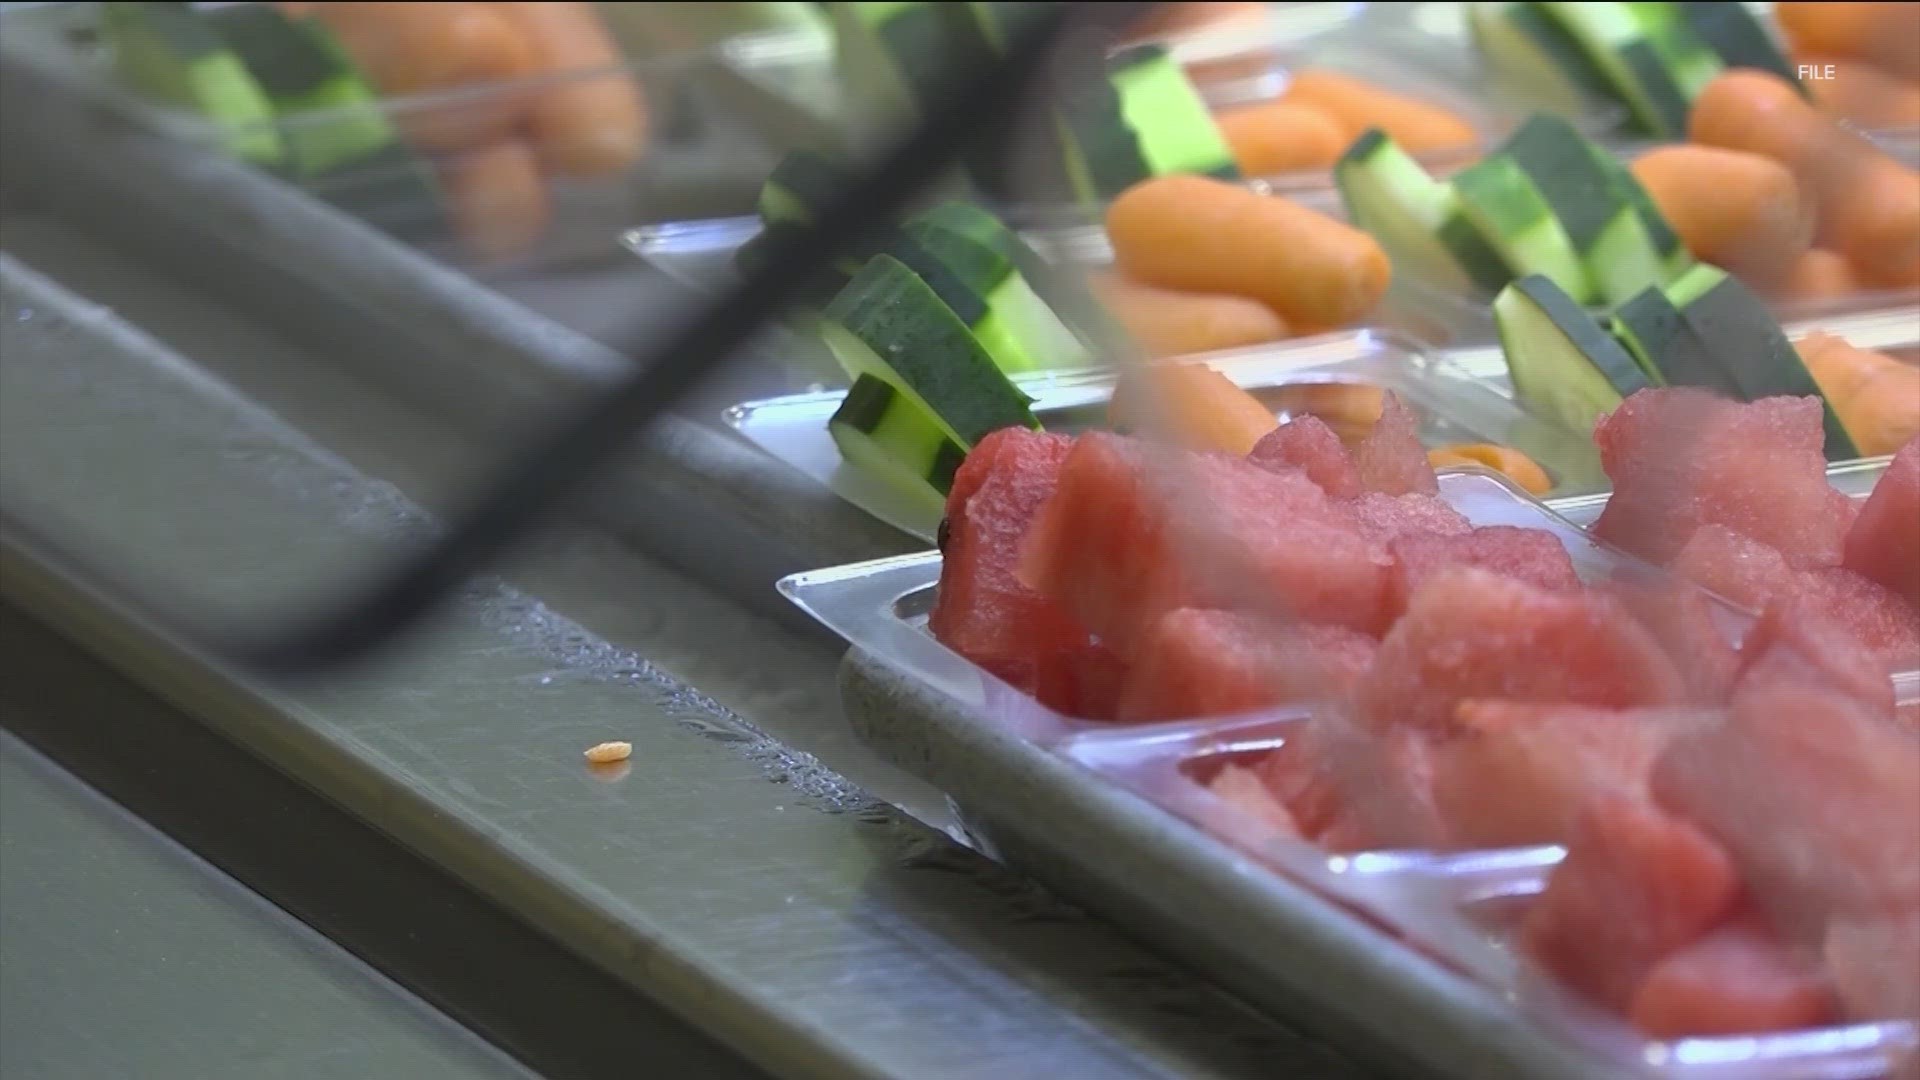 The school districts in Round Rock and Pflugerville have announced plans to keep students fed through the summer.